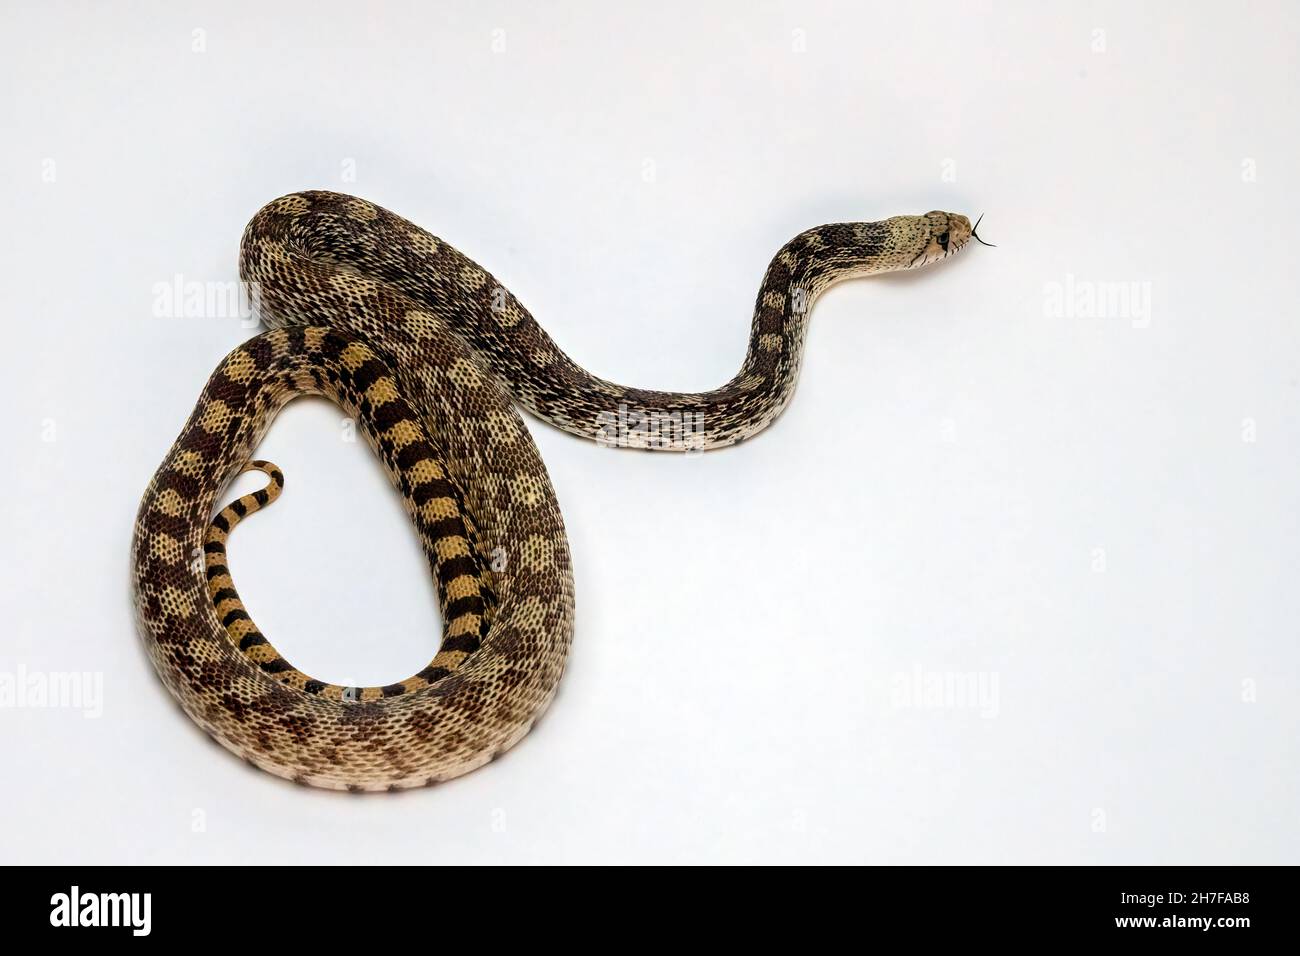 Gopher Snake Isolated on a White Background Stock Photo